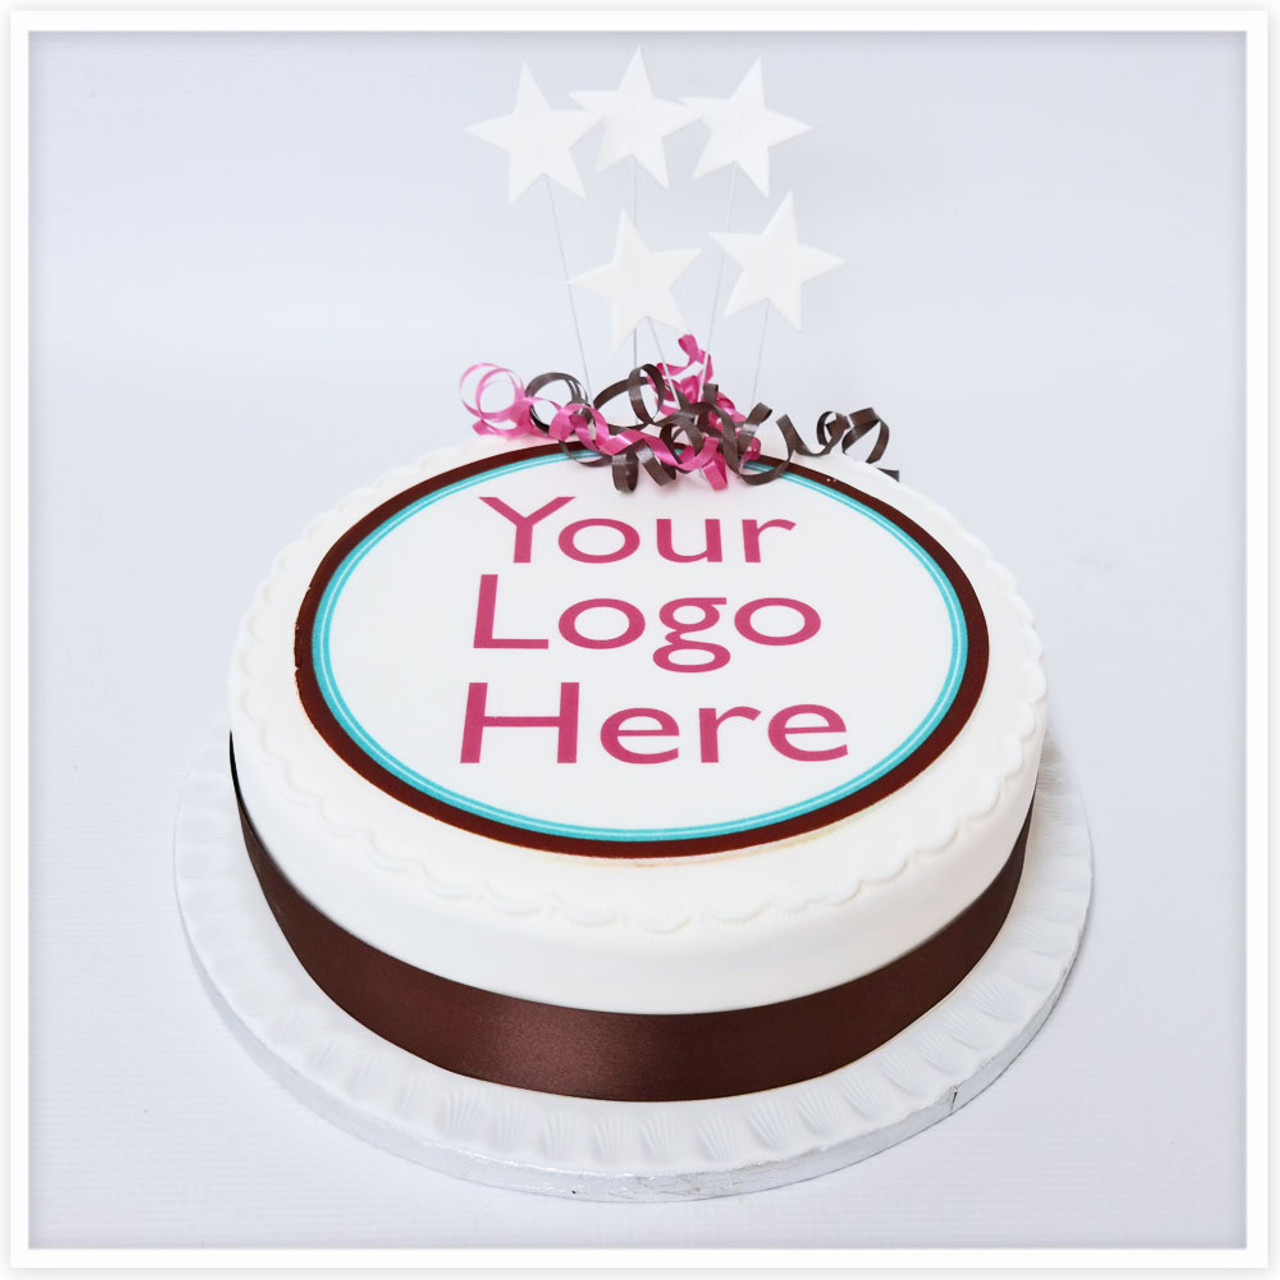 Gluten-free Corporate Cakes with Logo - Bakealicious By Gabriela